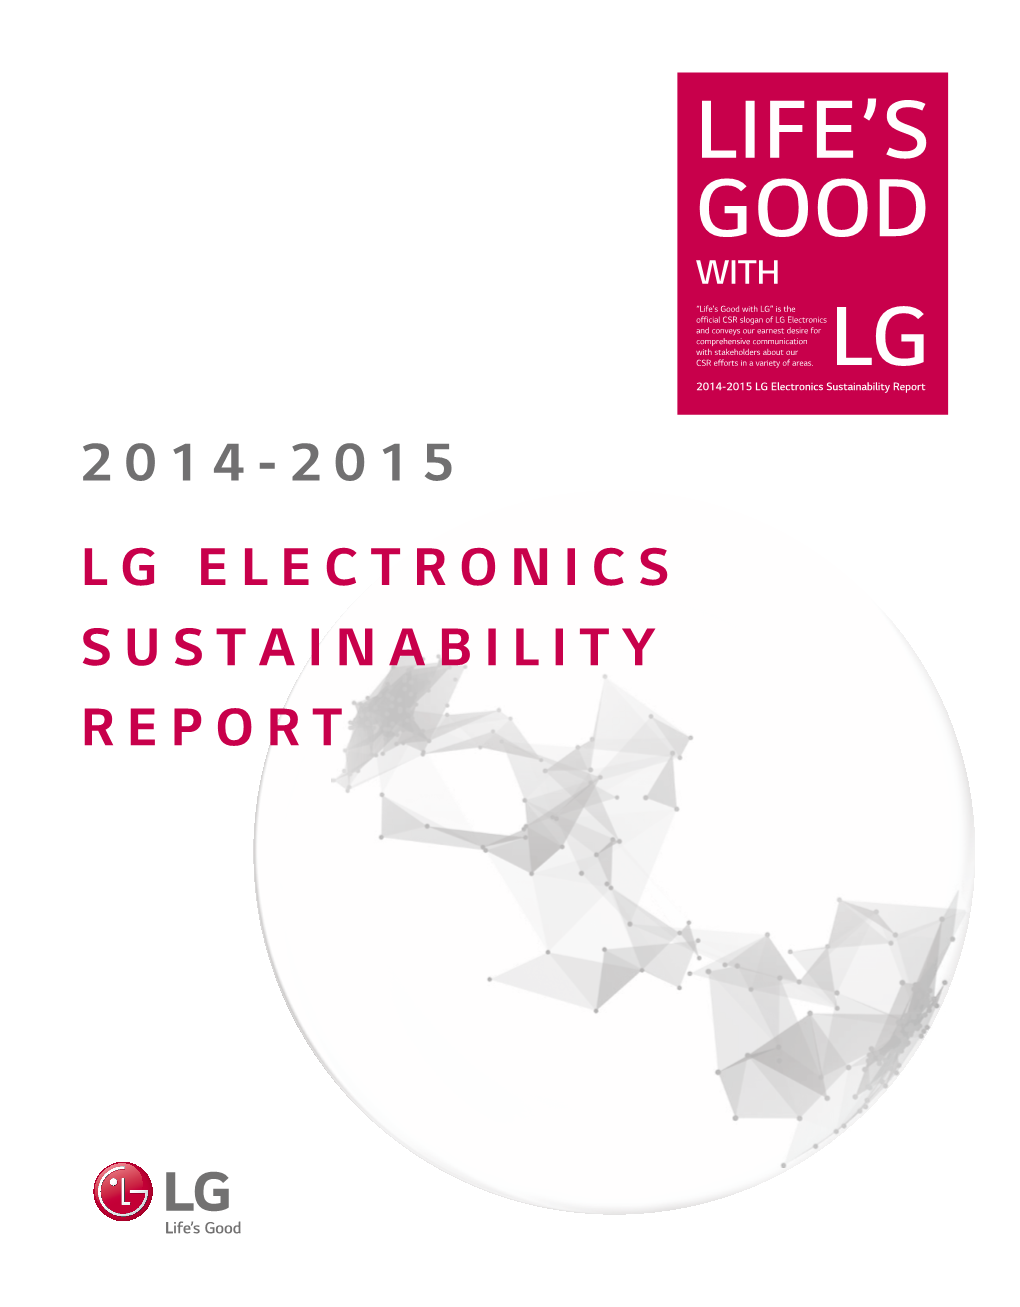 Life's Good Day 66 2014 - 2015 LG전자 지속가능경영보고서 Overview Stakeholder Communication Materiality Report // Appendix 67 with the Community